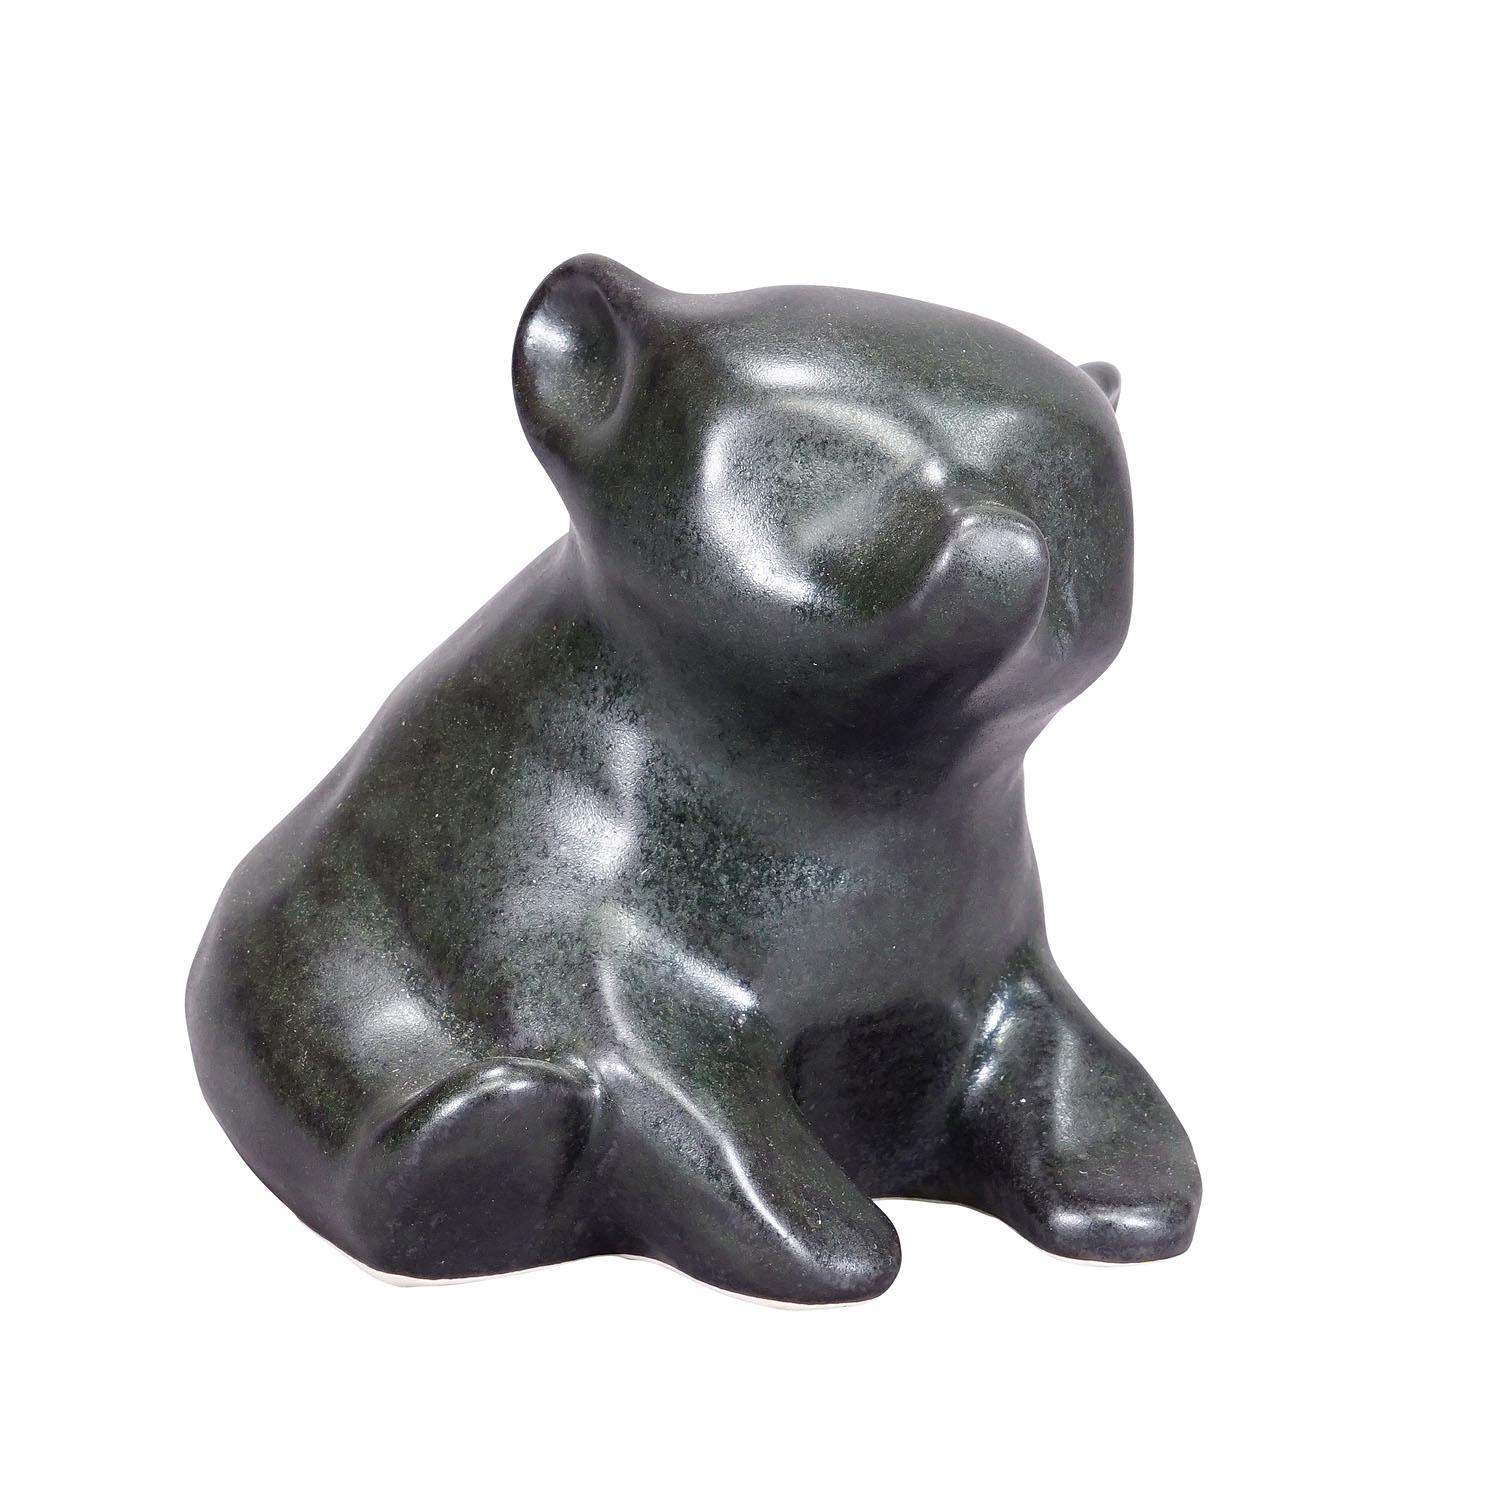 Stylized Bear Sculpture by Richard Lindh for Arabia Finland
Item e7279
A vintage ceramic statue depicting a bear. Made by Arabia Finland and designed by Richard Lindh. Excellent condition.

artfour is an owner-managed trading company that sells